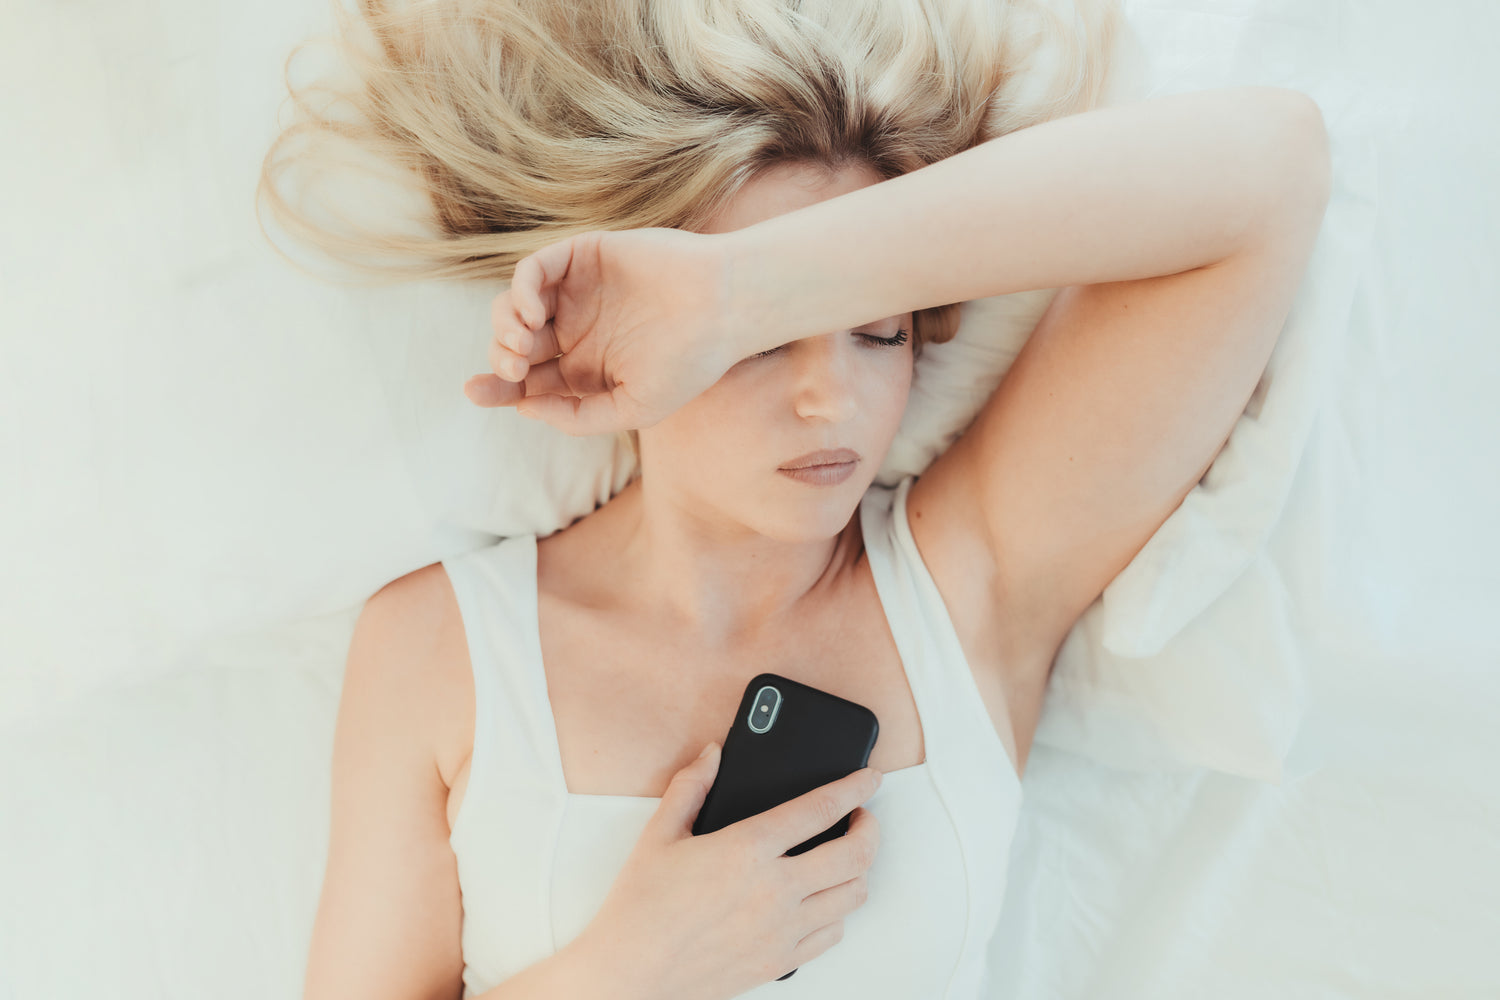 WOMAN-IN-BED-ON-HER-CELLPHONE